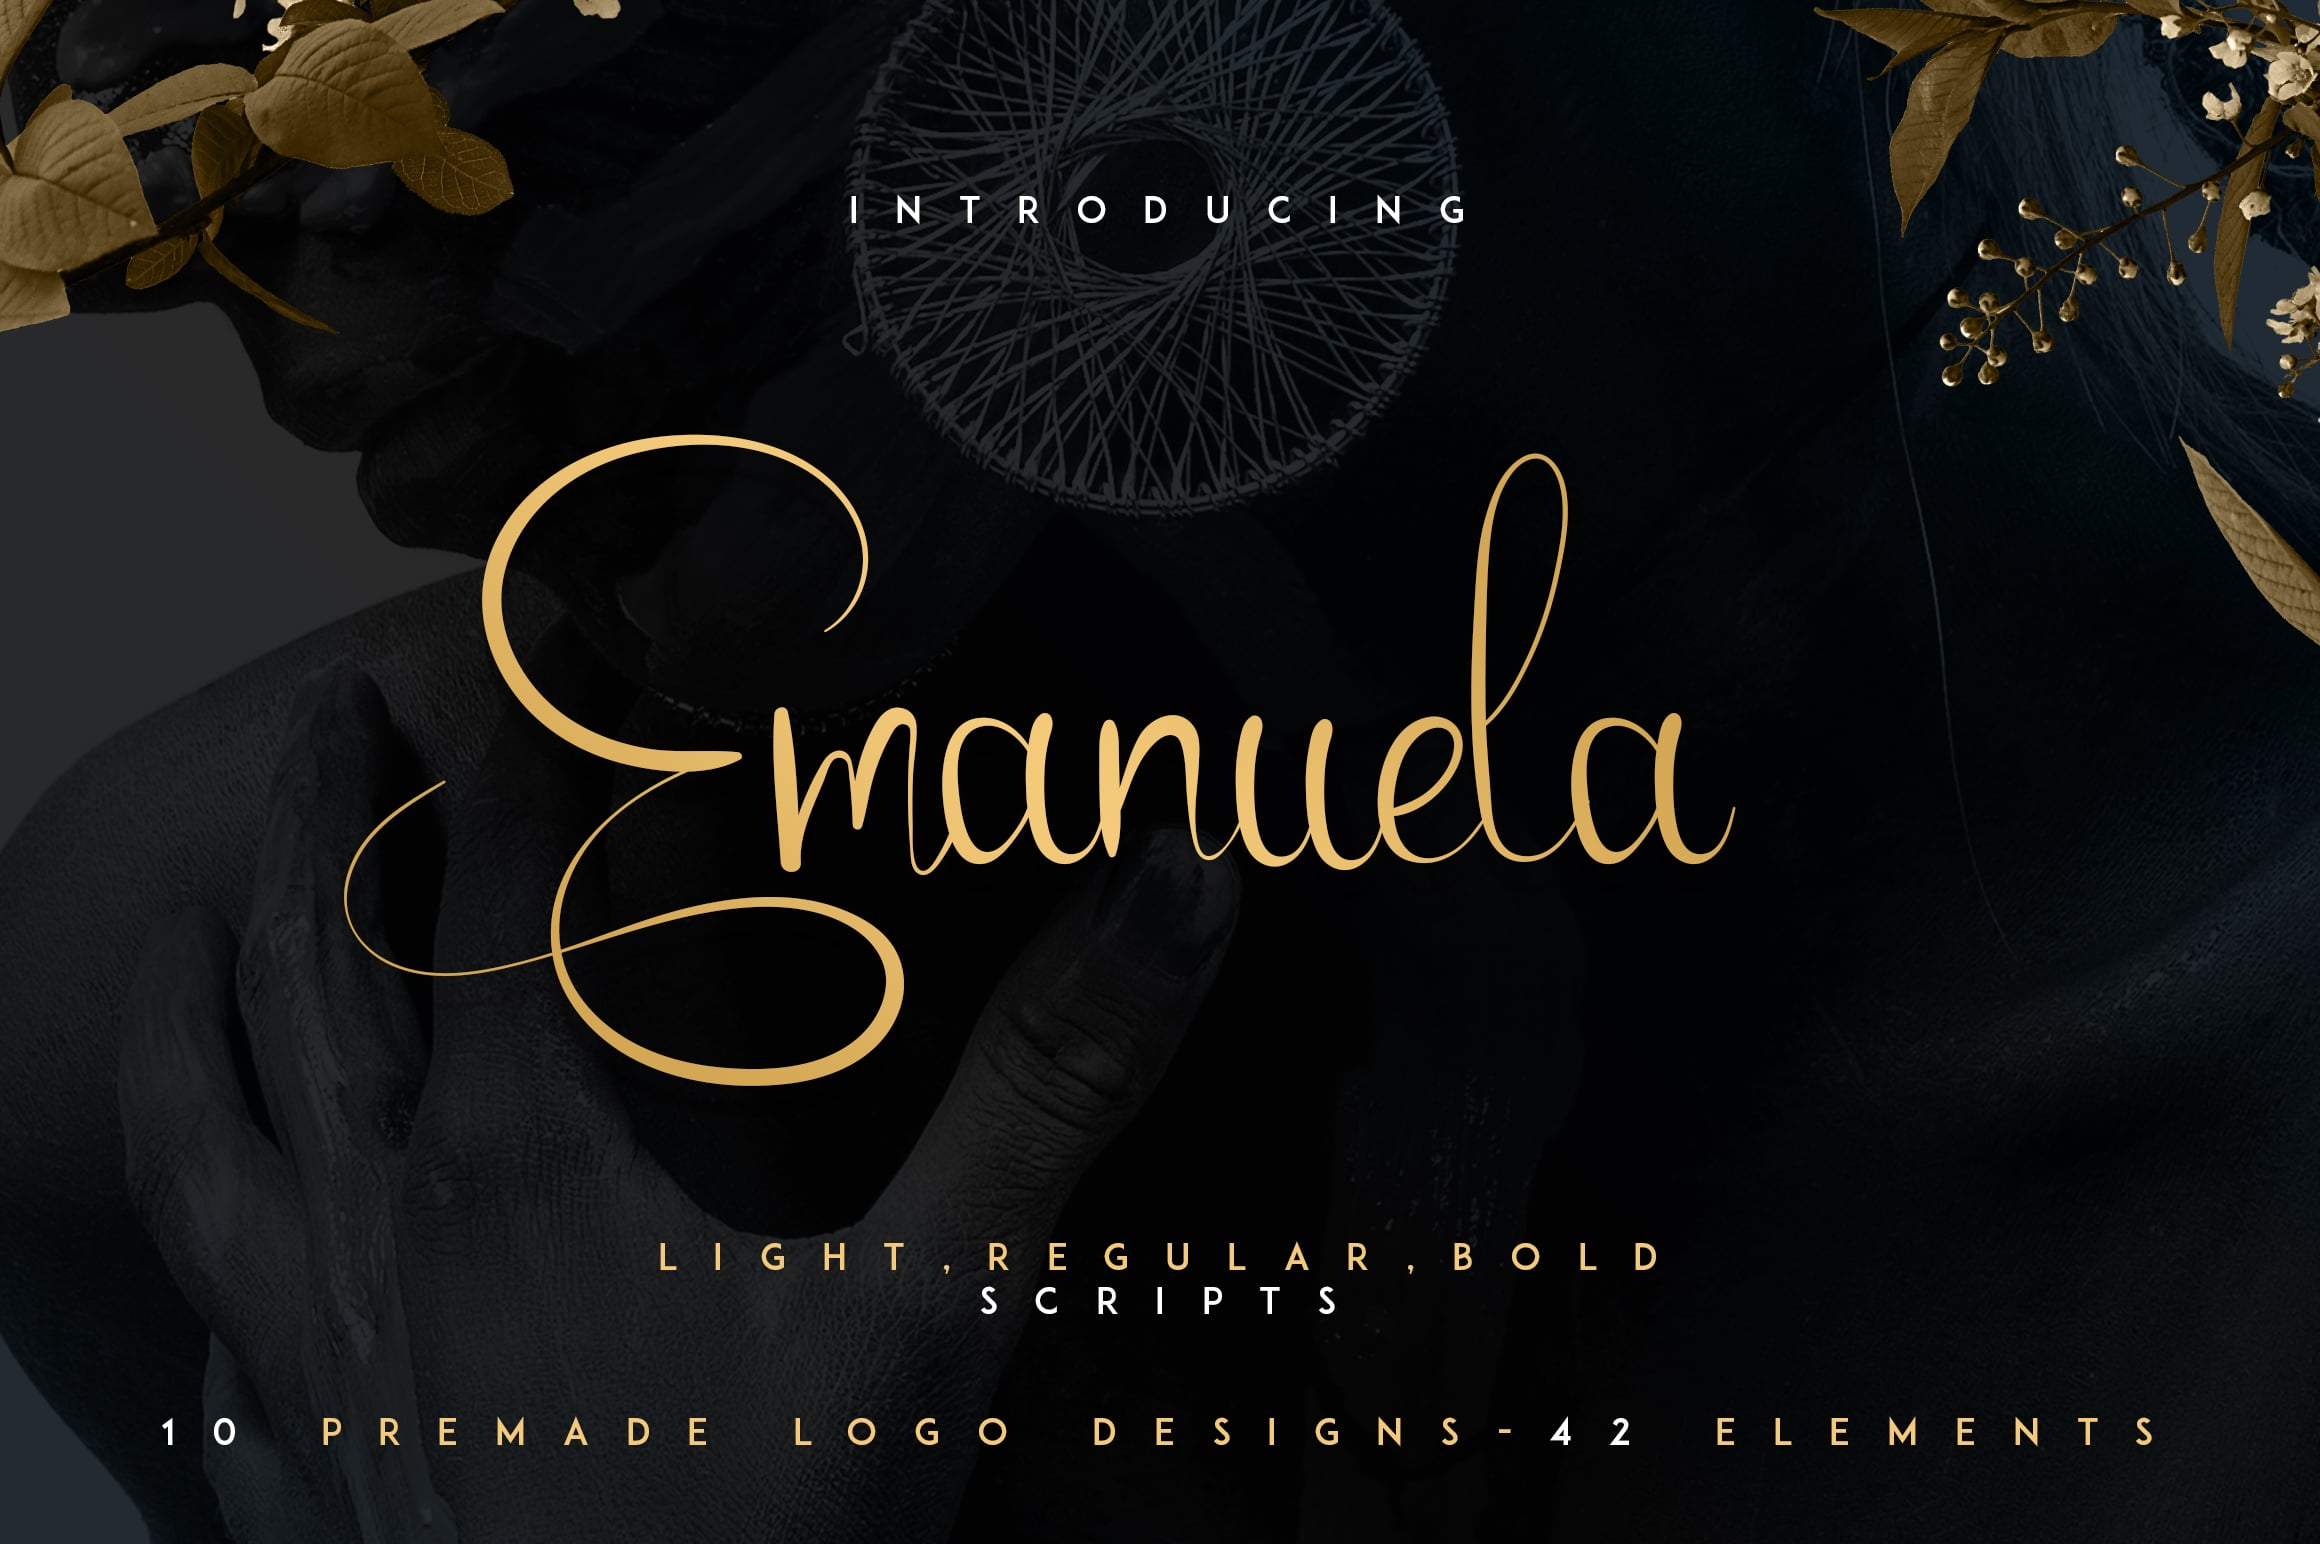 The main (title) image of Emanuela Typeface.